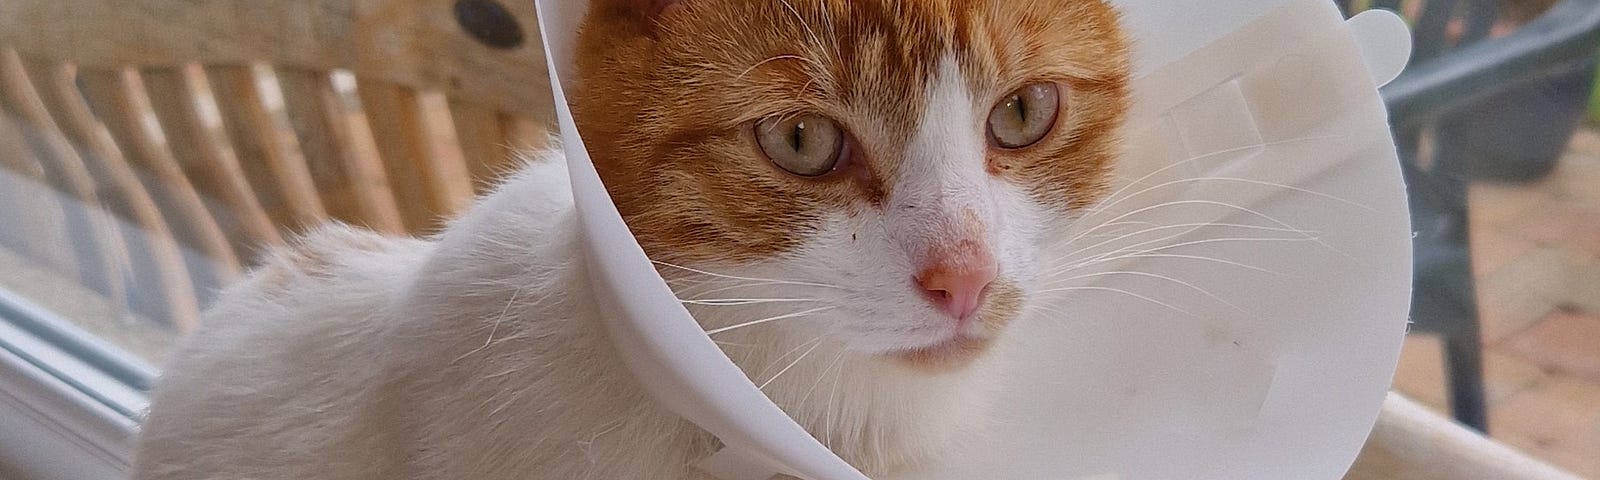 Coloured image showing a ginger and white cat with a plastic cone on its head. The cat is sitting in a window sill with a garden in the background.